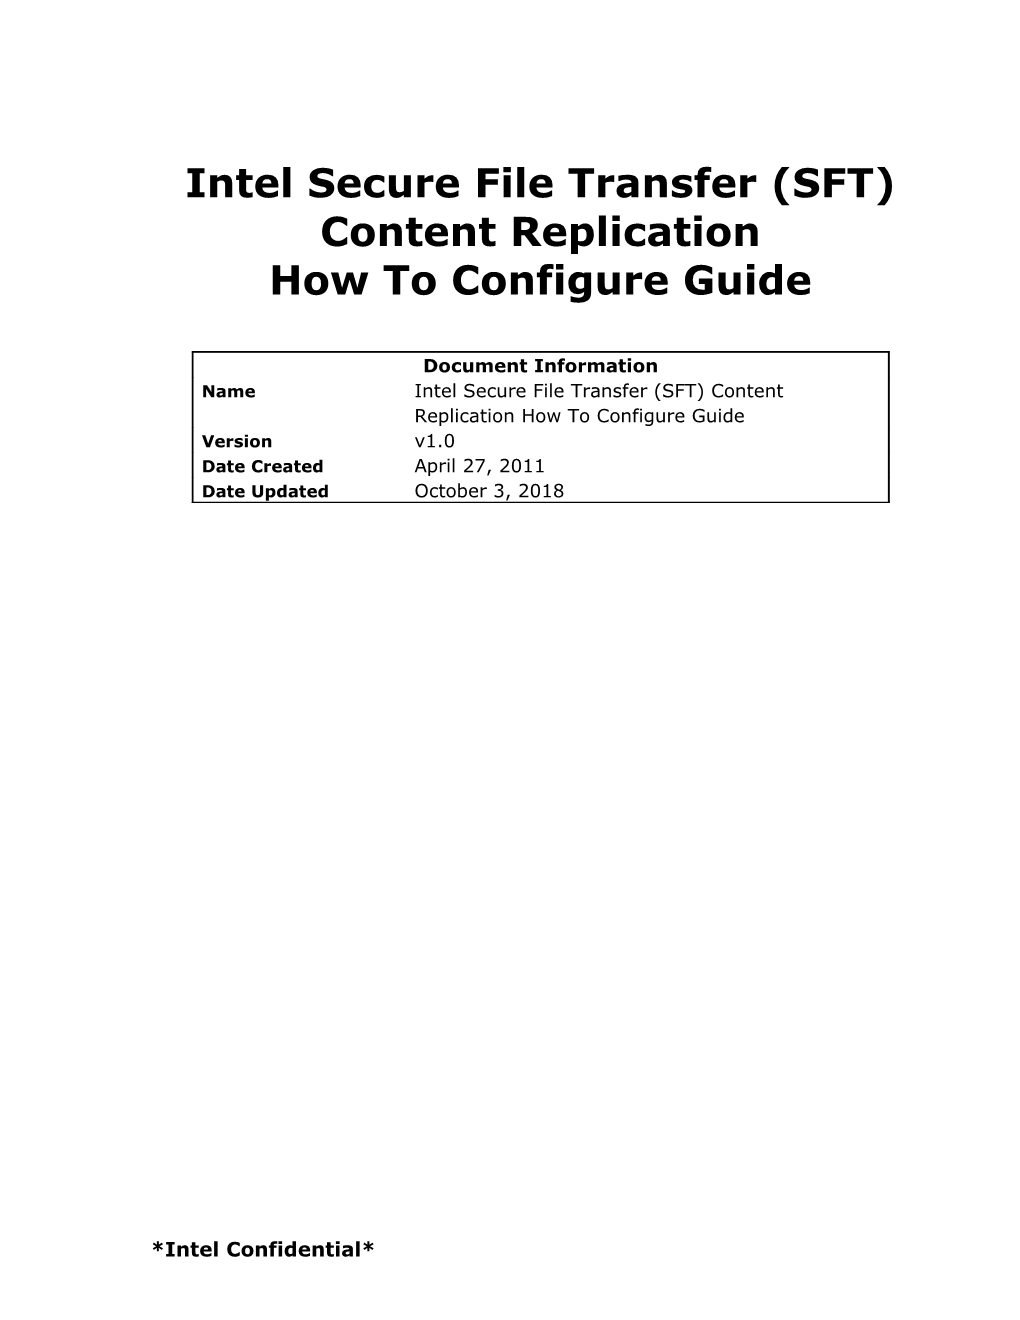 Intel SFT How to Configure Guide